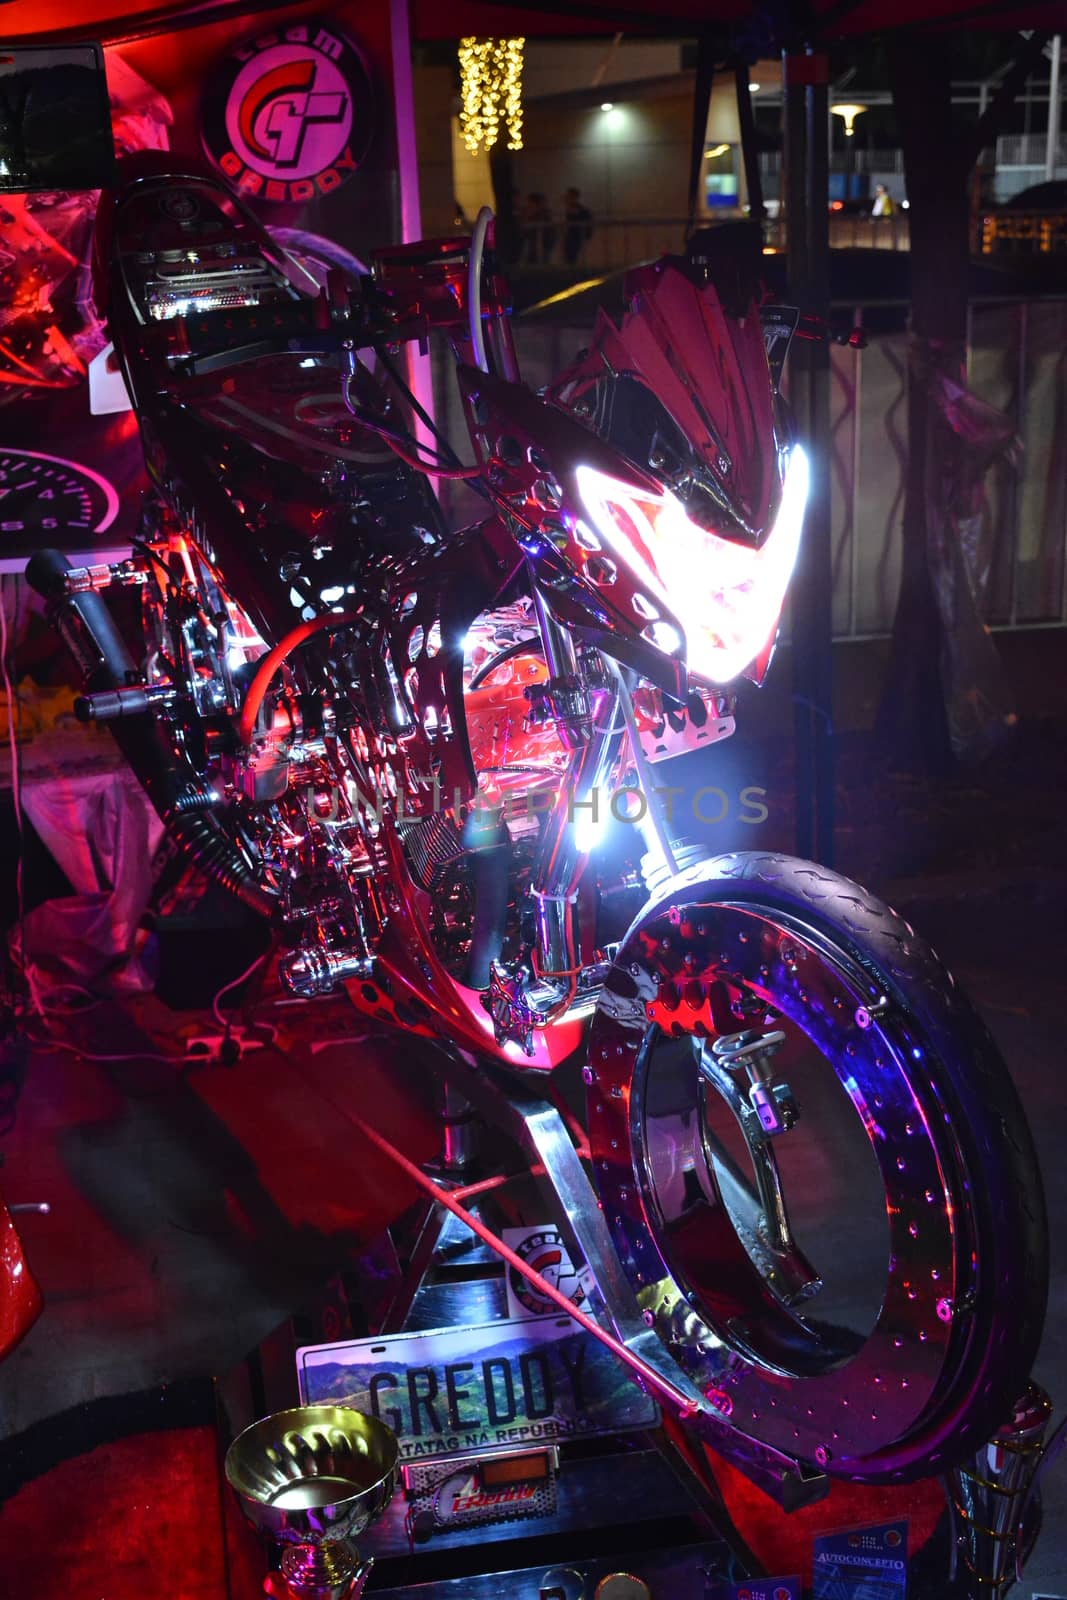 Customized motorcycle at Bumper to Bumper car show in Pasay, Phi by imwaltersy